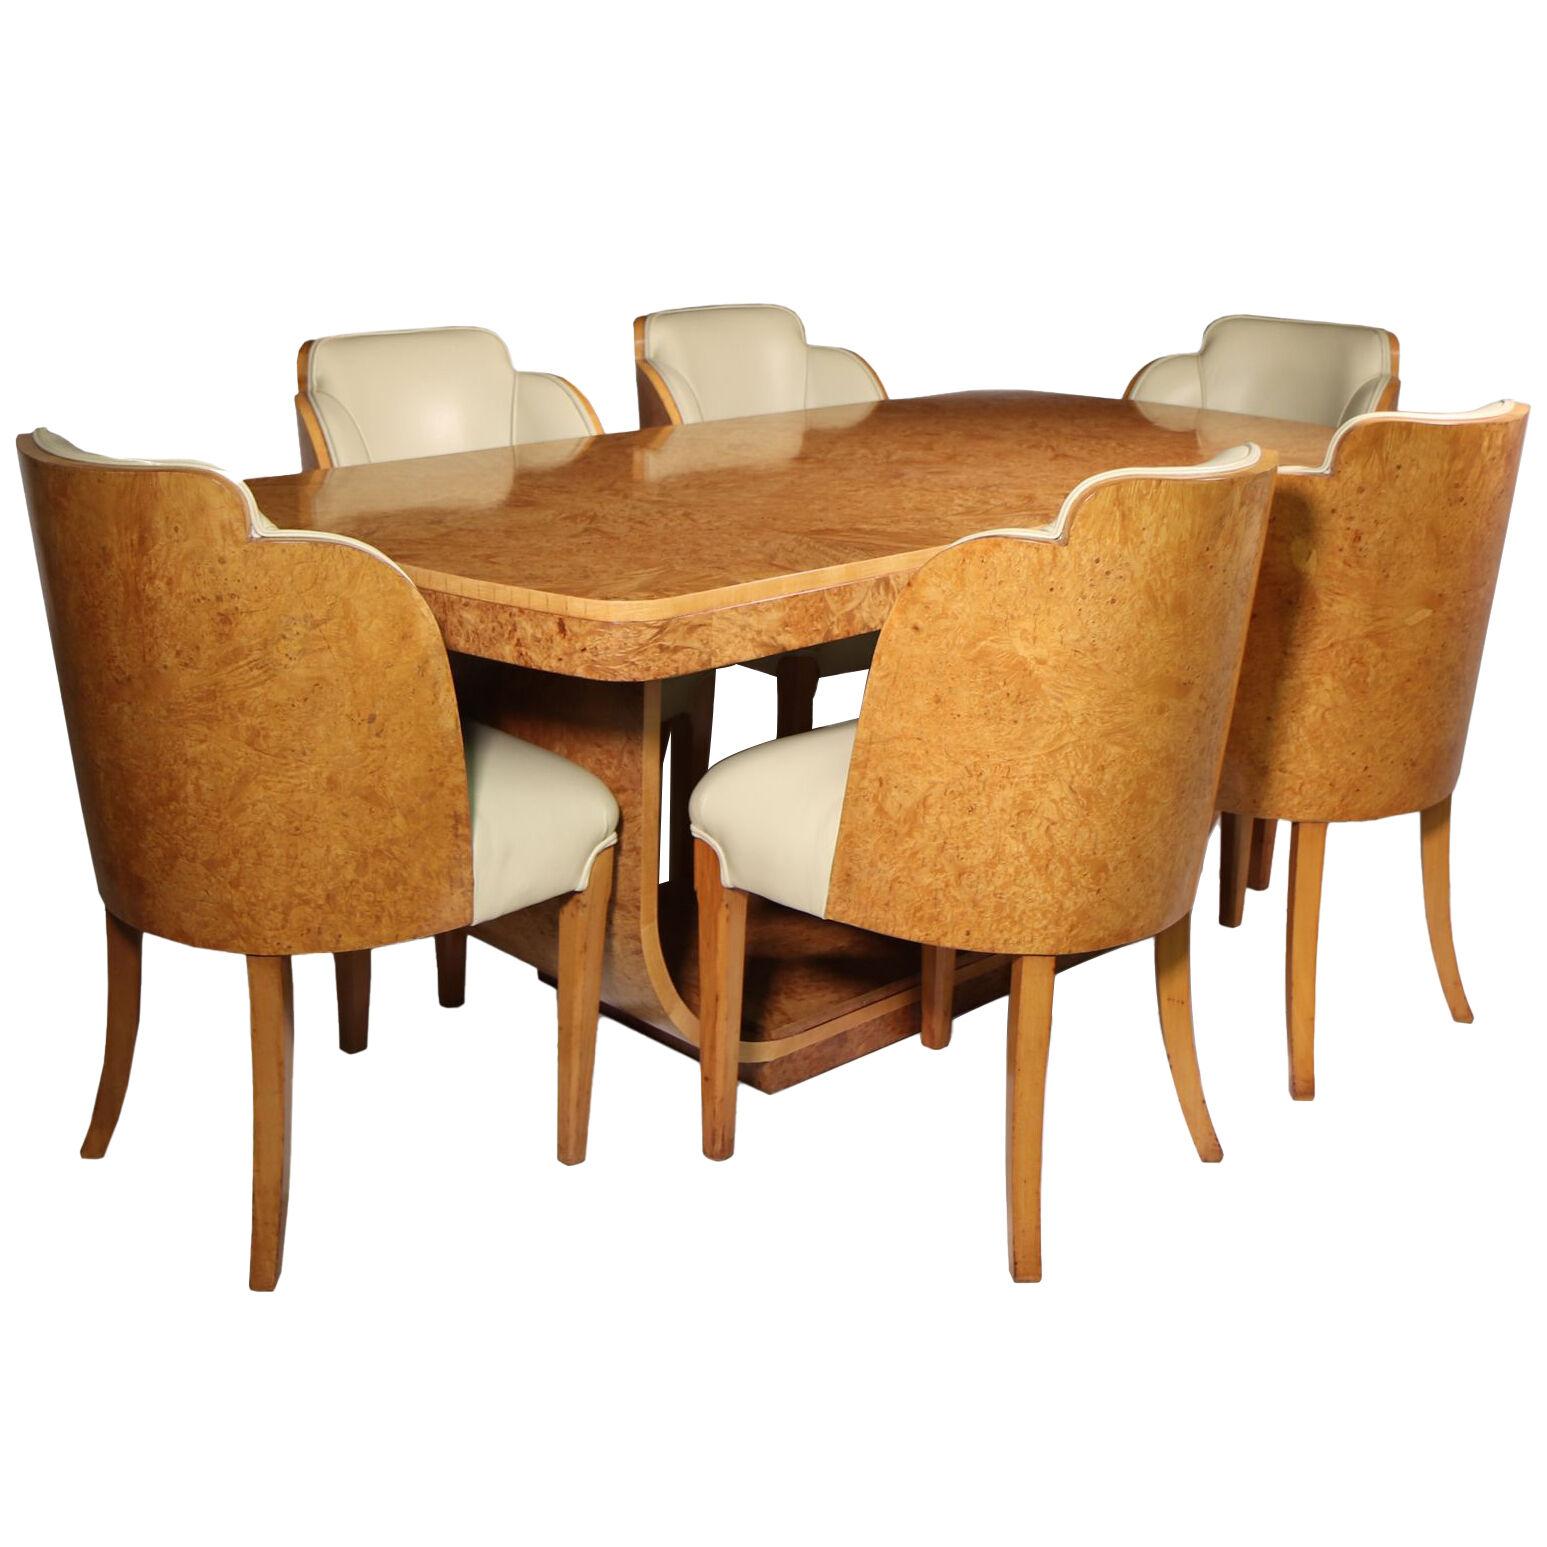 Art Deco Burr Maple Dining Table and 6 Cloud Chairs by Epstein